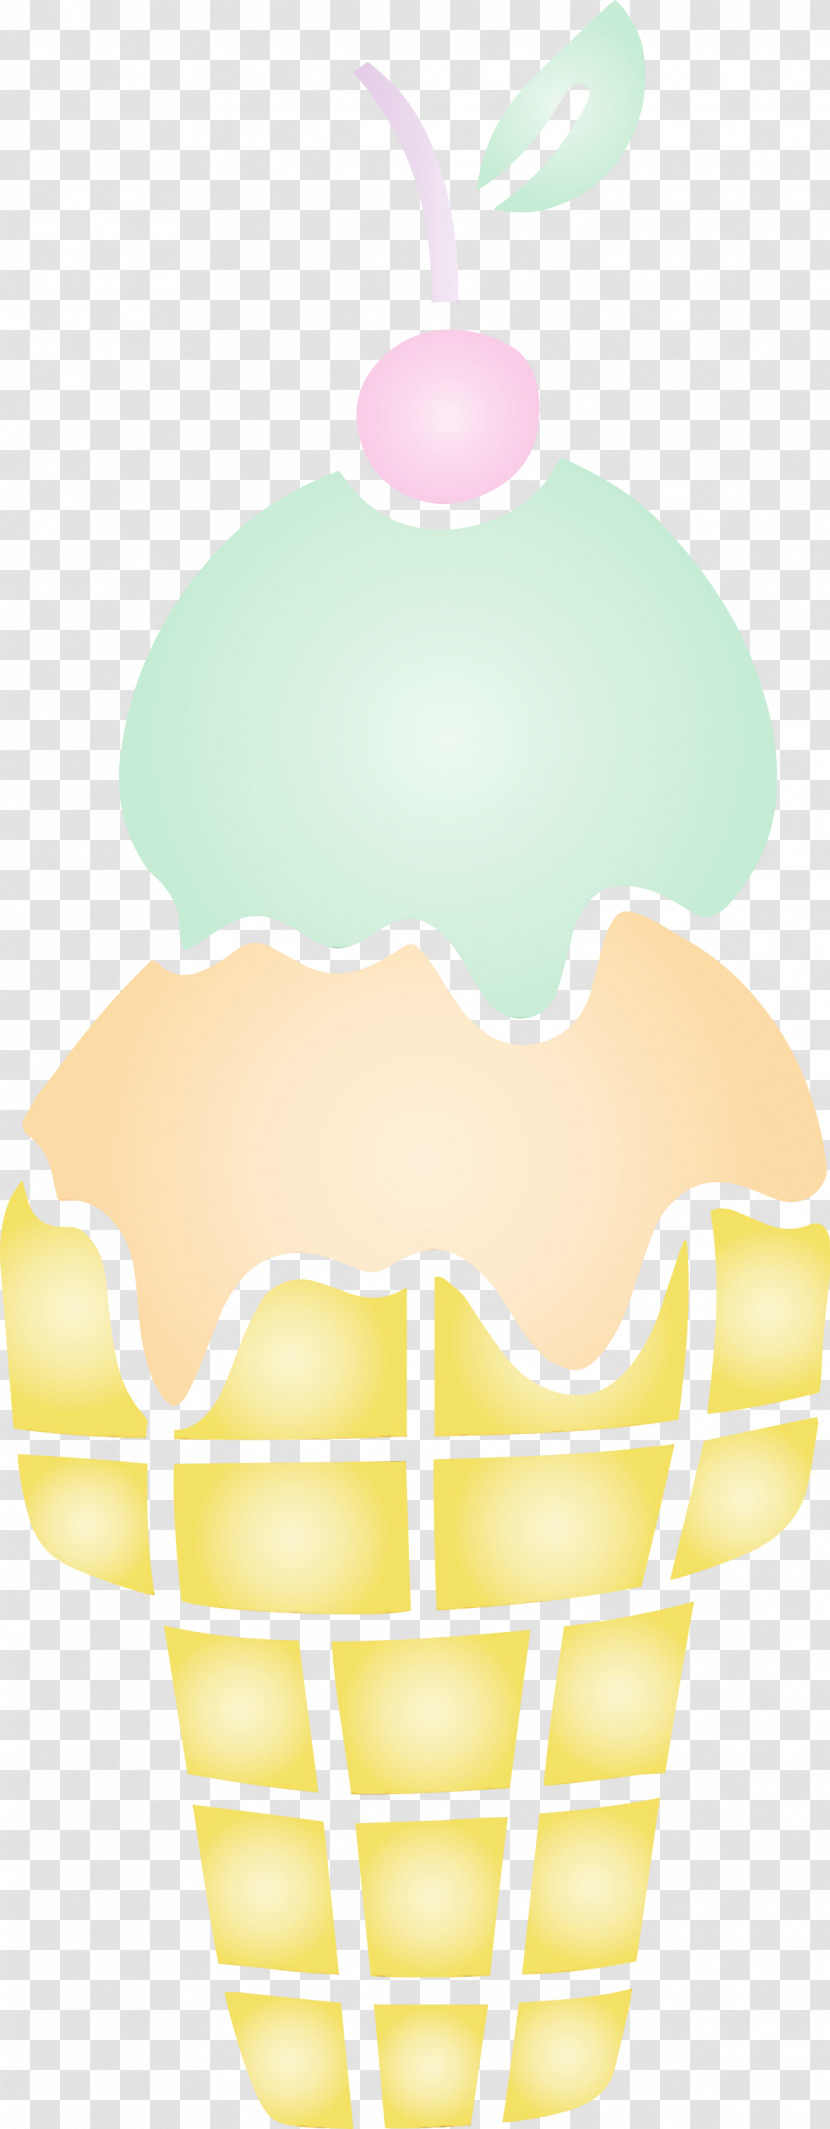 Ice Cream Cone Yellow Pattern Cone Fruit Transparent PNG